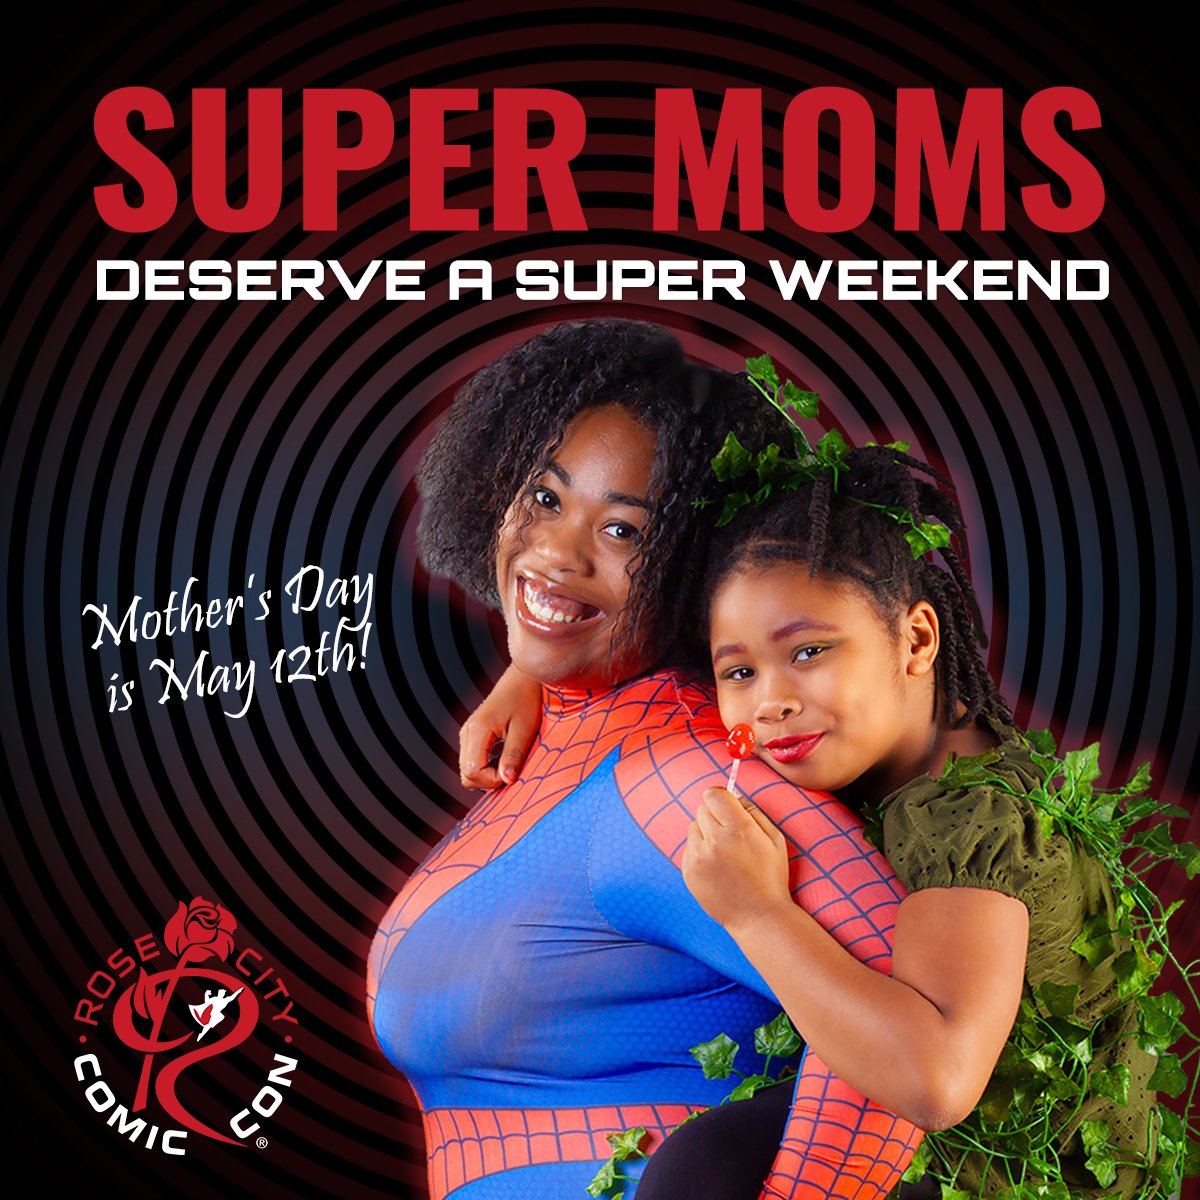 📢 Heads up! Mother's Day is May 12th, and if you need a SUPER gift for your 🦸 SUPER mom, consider a badge to #RCCC! Trust us, she's gonna LOVE it! 🎟️ >> rosecitycomiccon.com/badges